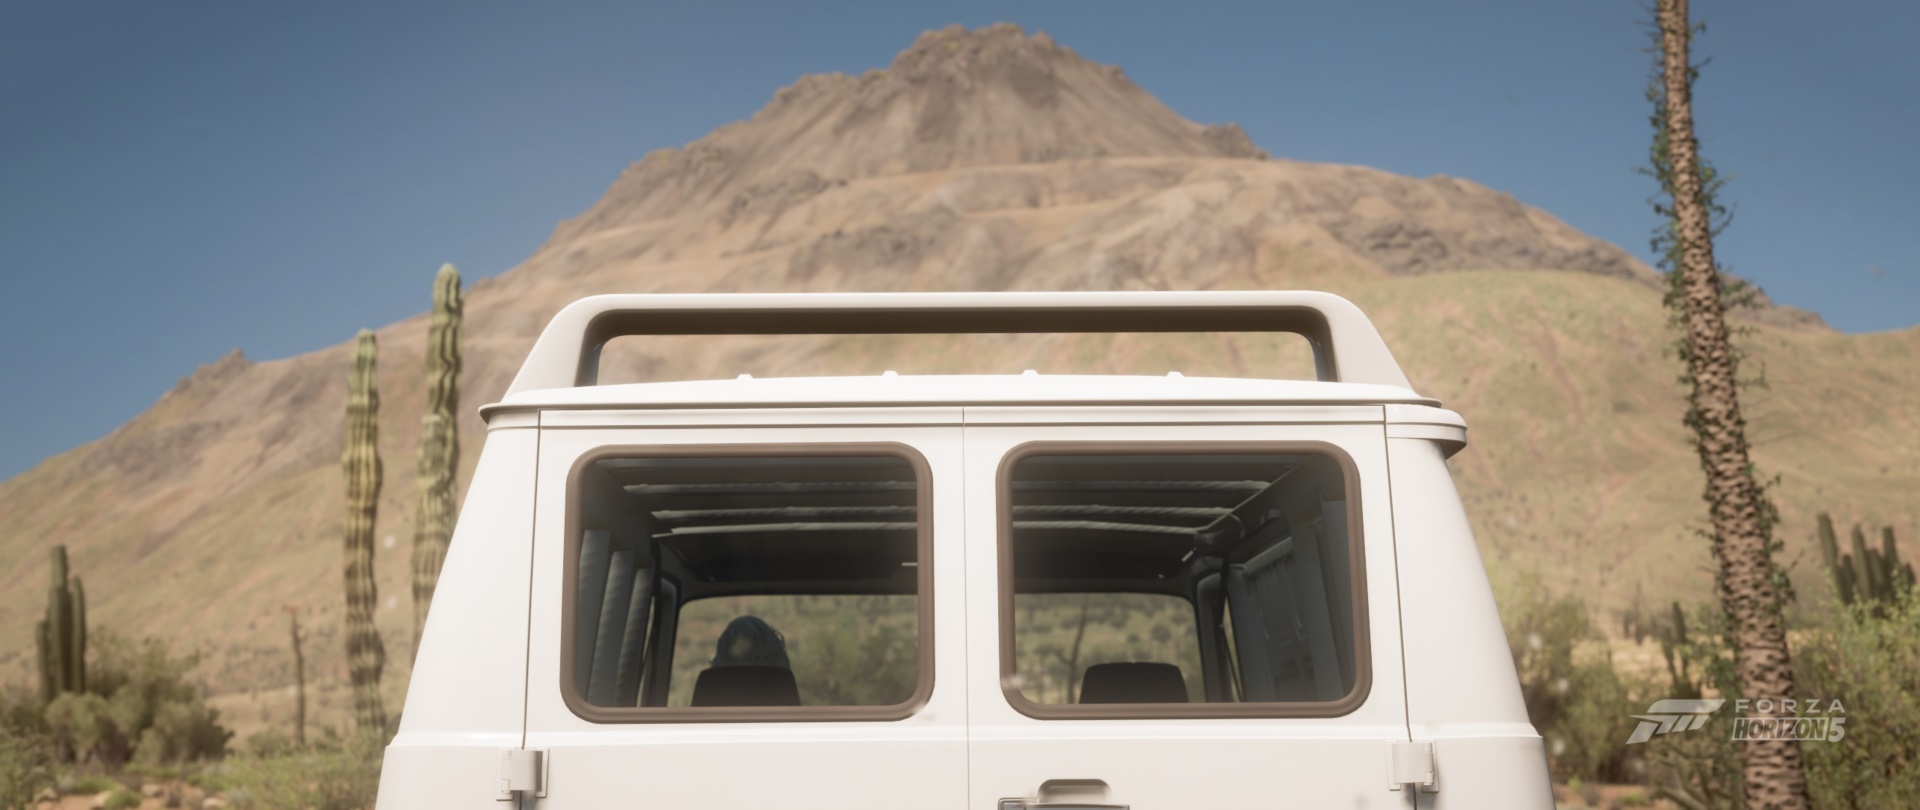 A van sits at the foot of the central volcano in "Forza Horison 5". Screenshot captured by Quint Iverson.